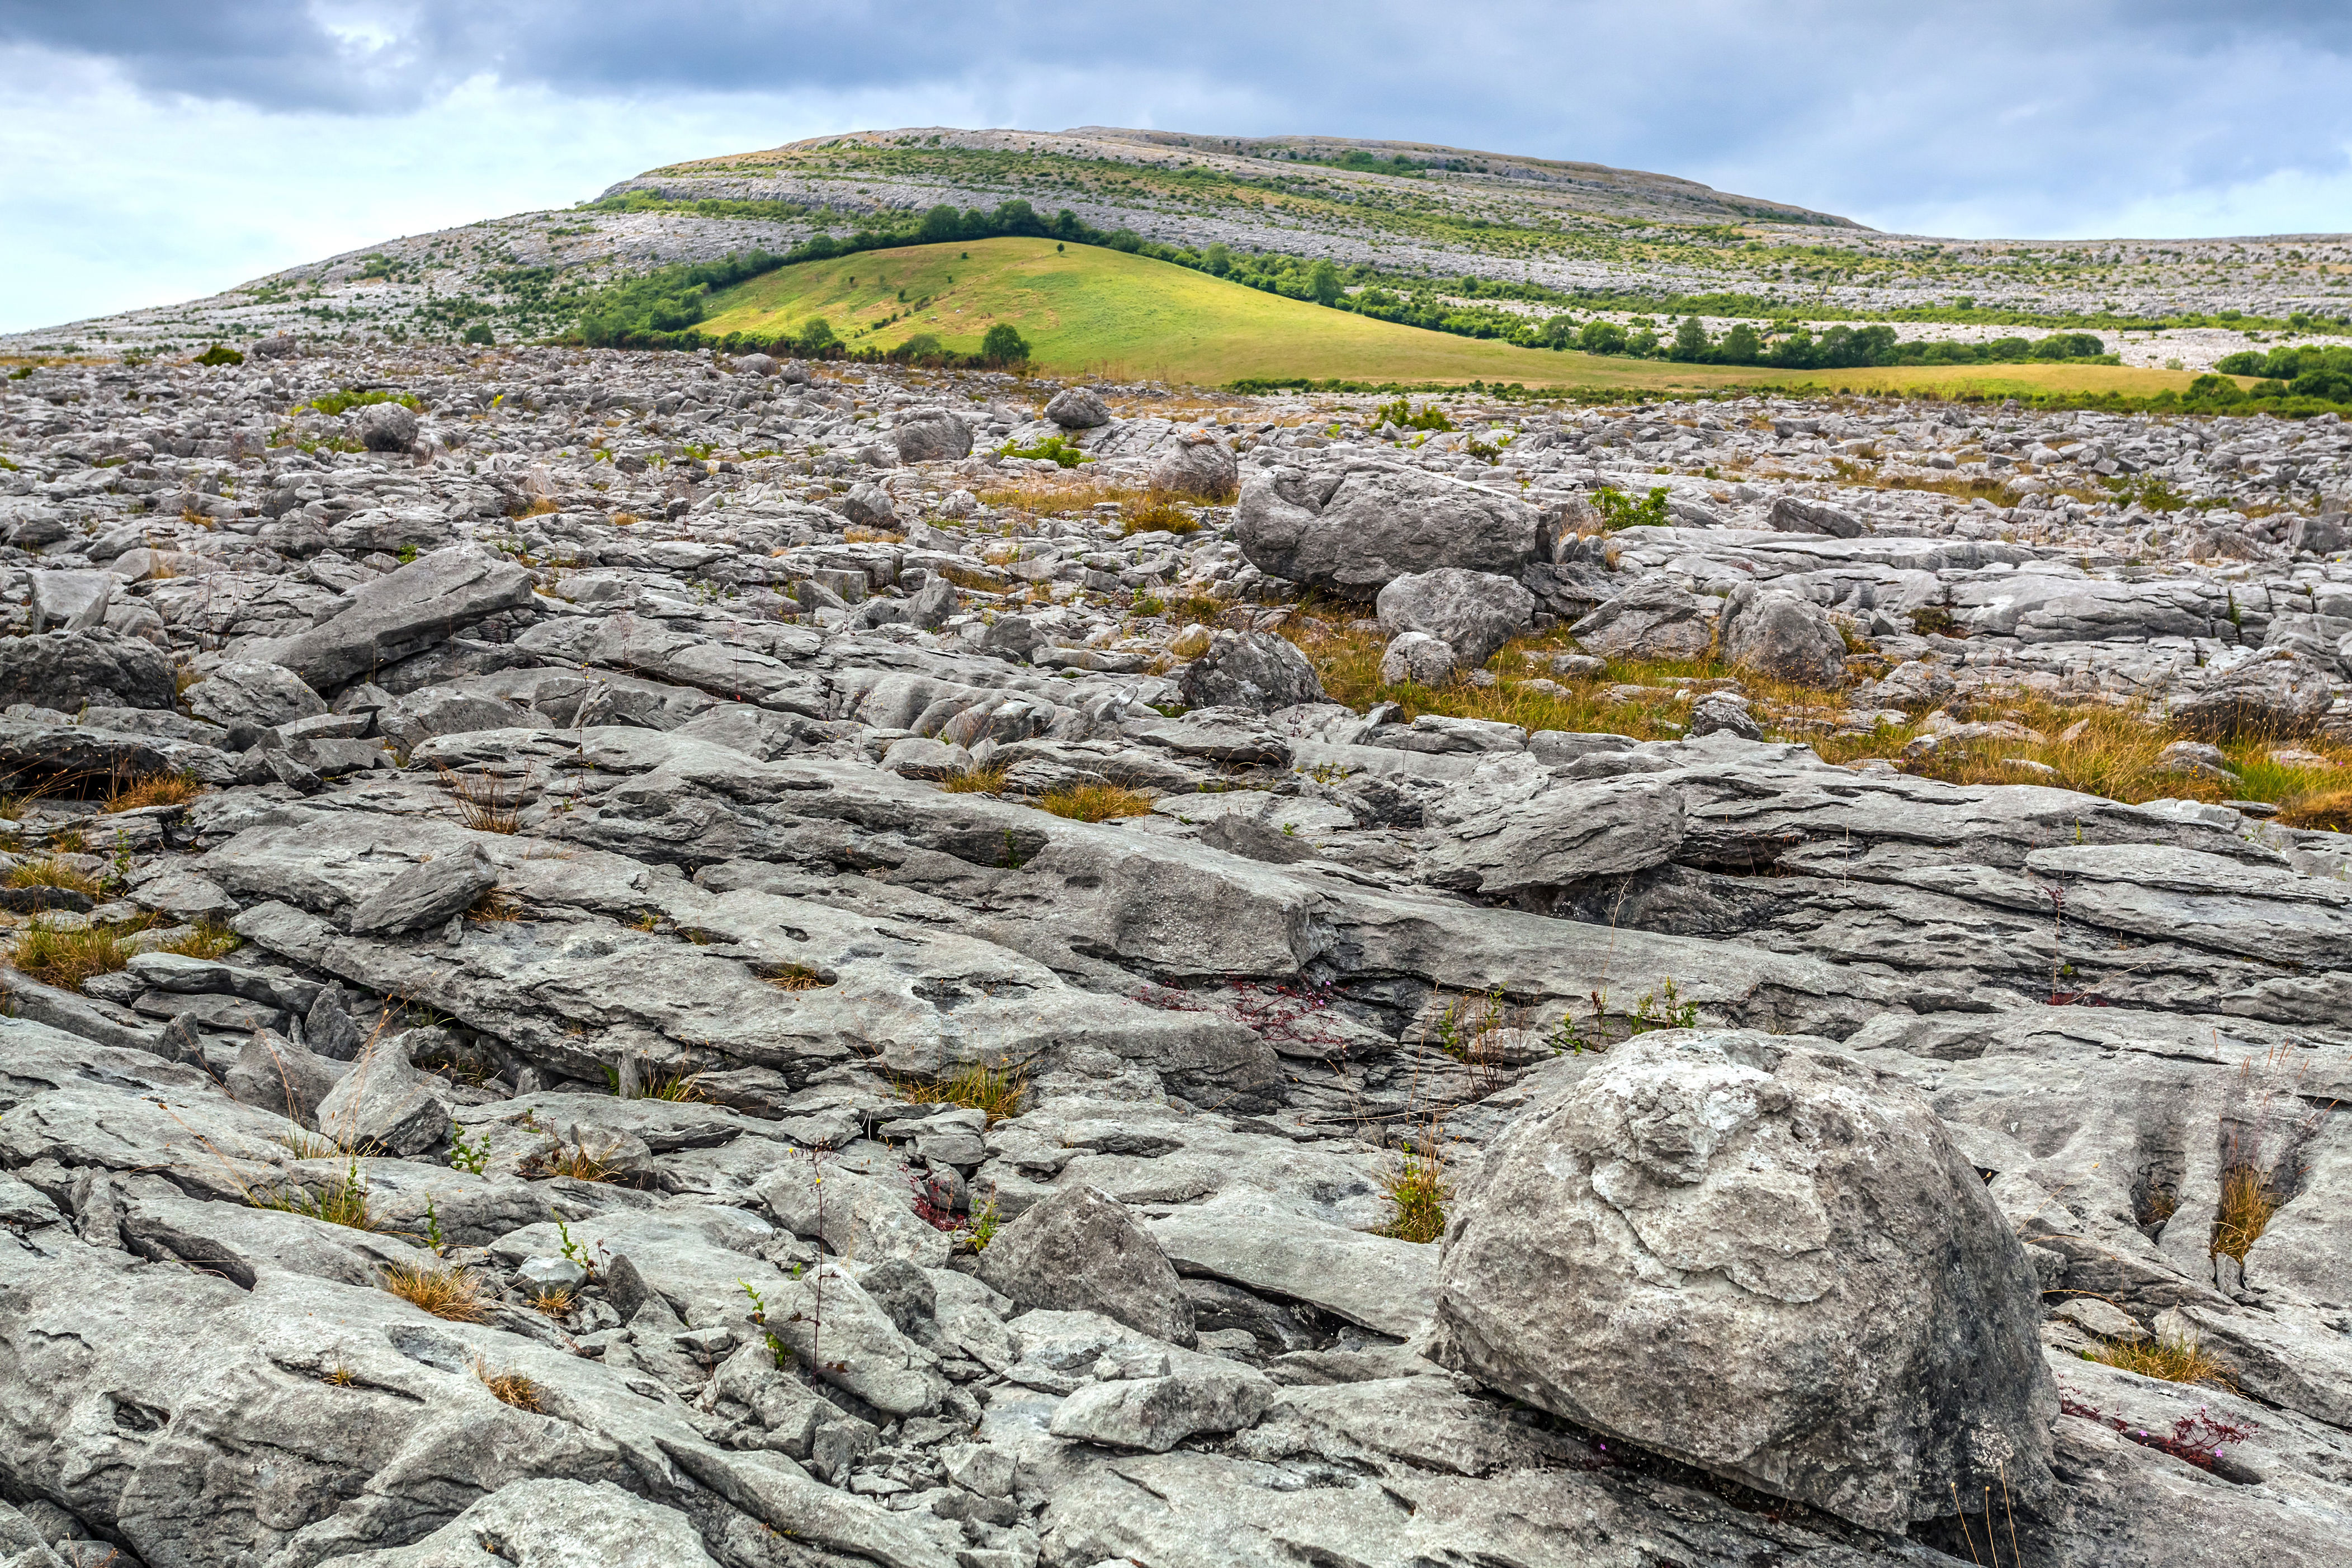 <p><strong>Location:</strong> County Clare</p> <p>The Burren (Irish for “great rock”) is not only unearthly and ethereal—it’s a geological rarity. The 150-square-mile area consists of thick layers of limestone dotted with a unique <a href="https://www.cntraveler.com/gallery/15-beautiful-pictures-of-spring-flowers-around-the-world?mbid=synd_msn_rss&utm_source=msn&utm_medium=syndication">variety of flowers</a>, ranging from arctic wildflowers to 25 different species of orchids. Visit in May to see most of the flora in full bloom.</p><p>Sign up to receive the latest news, expert tips, and inspiration on all things travel</p><a href="https://www.cntraveler.com/newsletter/the-daily?sourceCode=msnsend">Inspire Me</a>